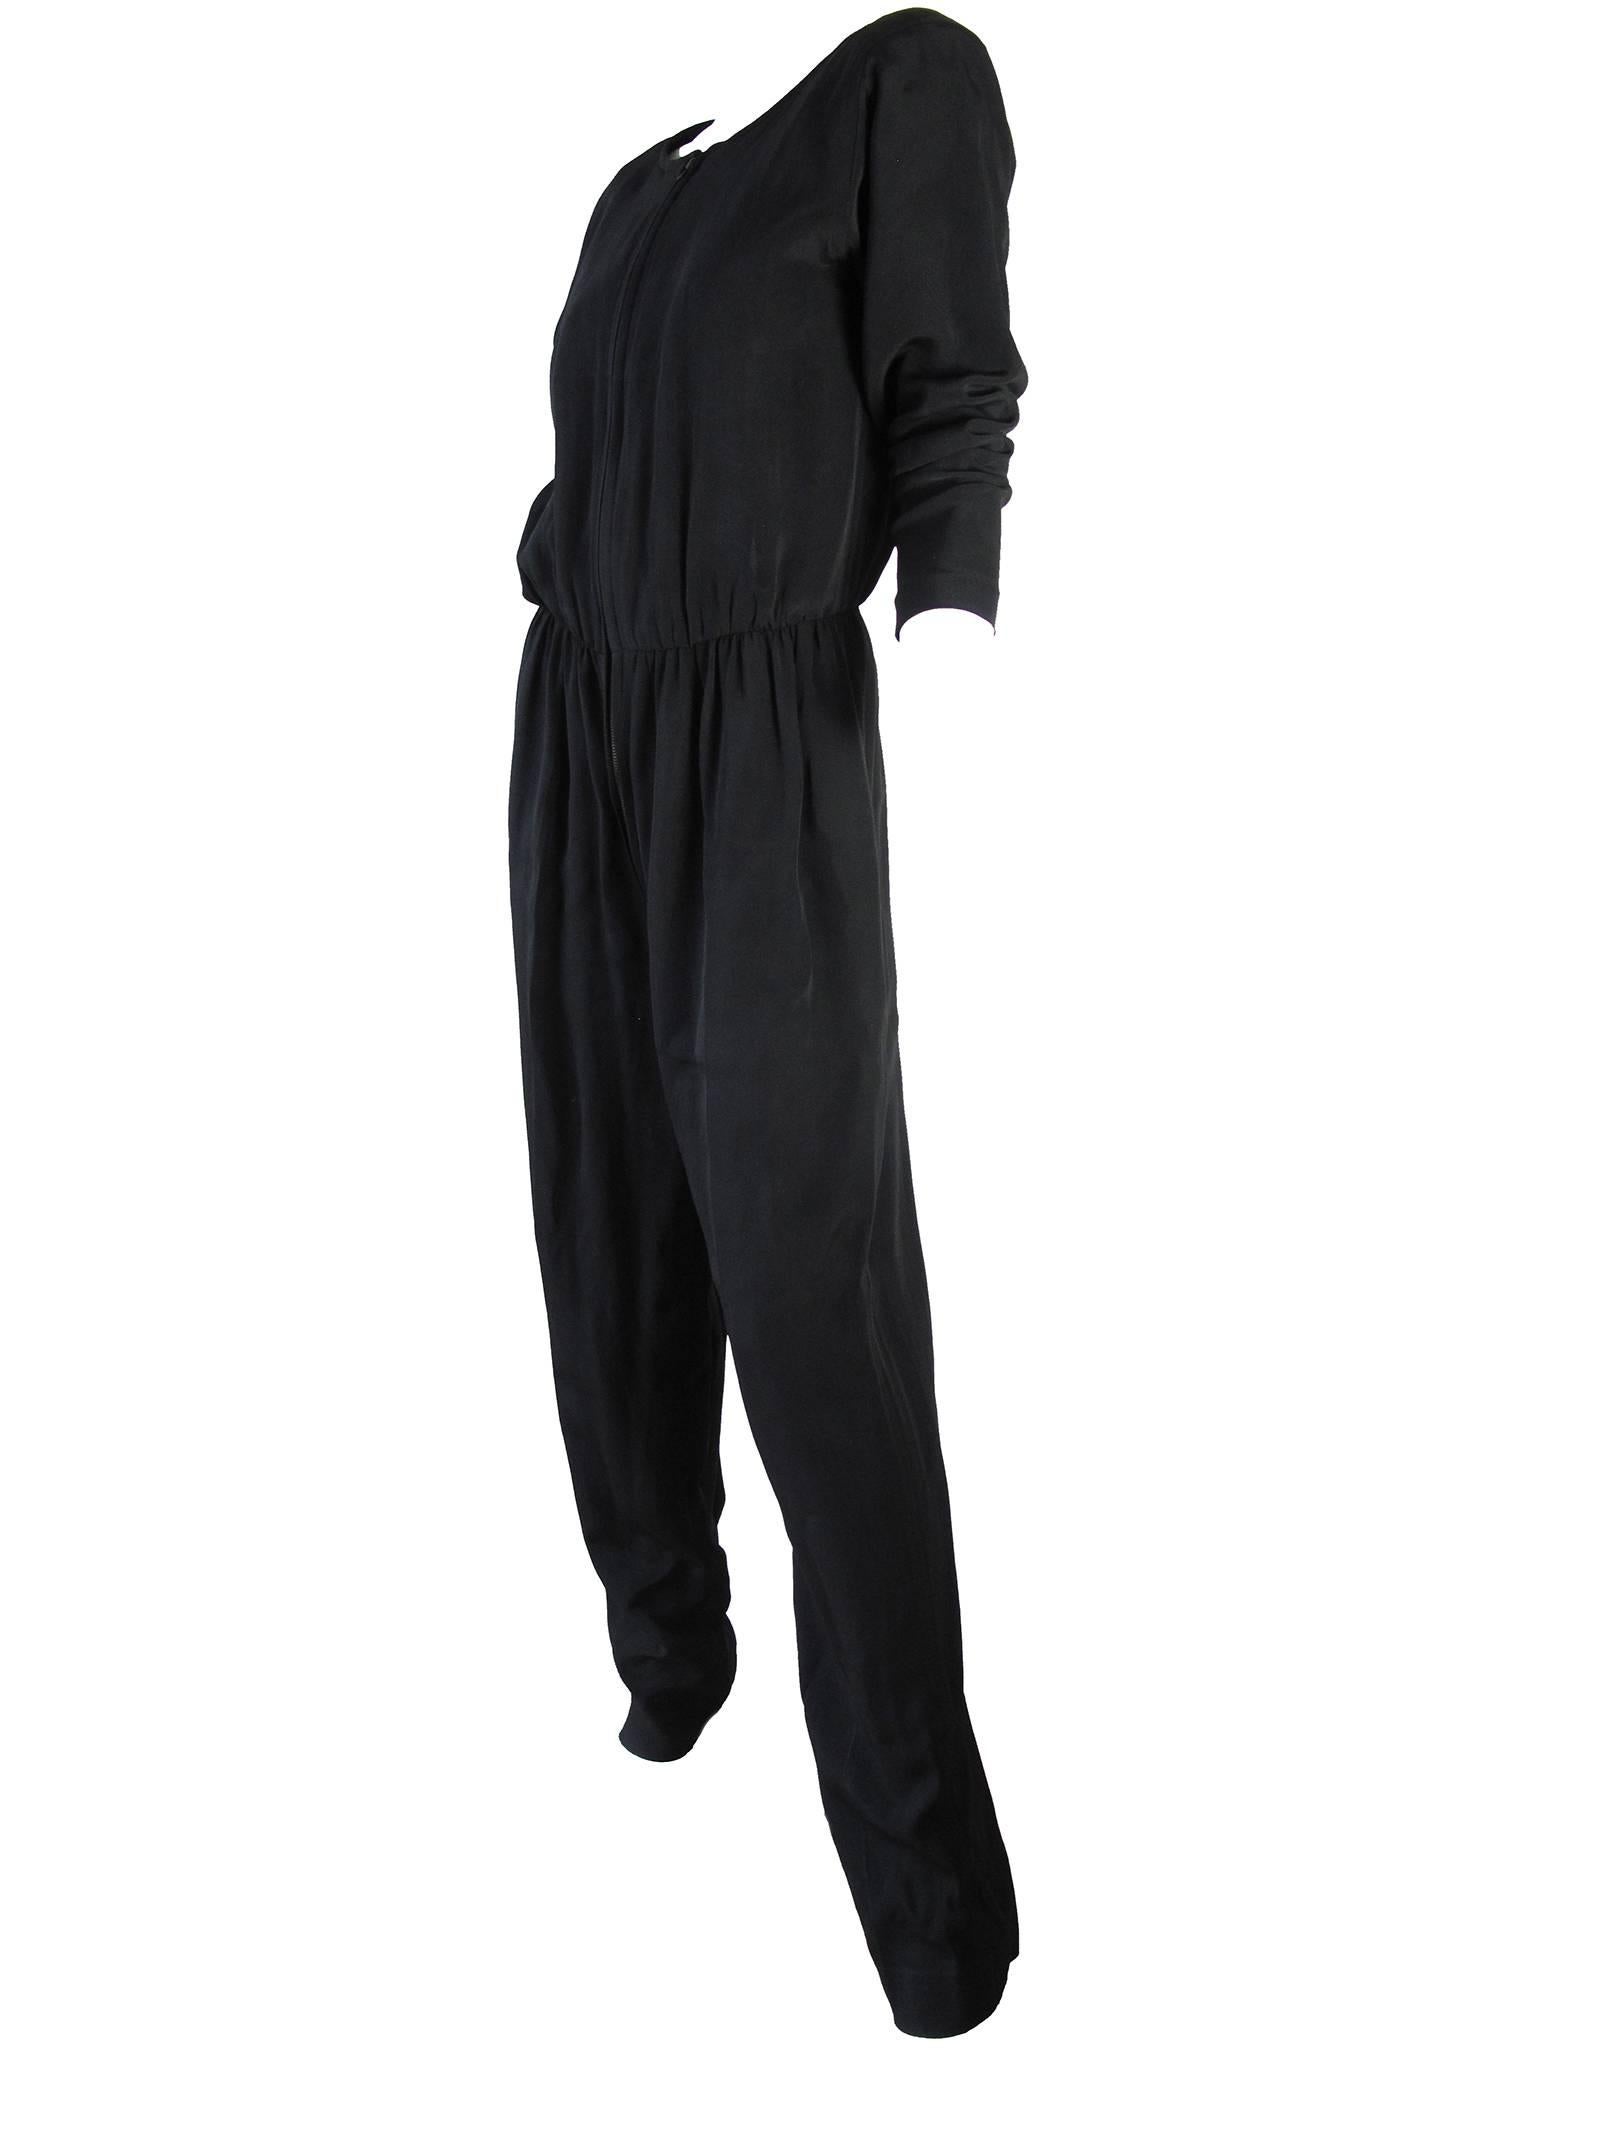 Yves Saint Laurent black jumpsuit.  Zipper down front, elastic waist. Condition: good, some all over wear.  Size M (mannequin is a us size 6)

We accept returns for refund, please see our terms.  We offer free ground shipping within the US.  Please